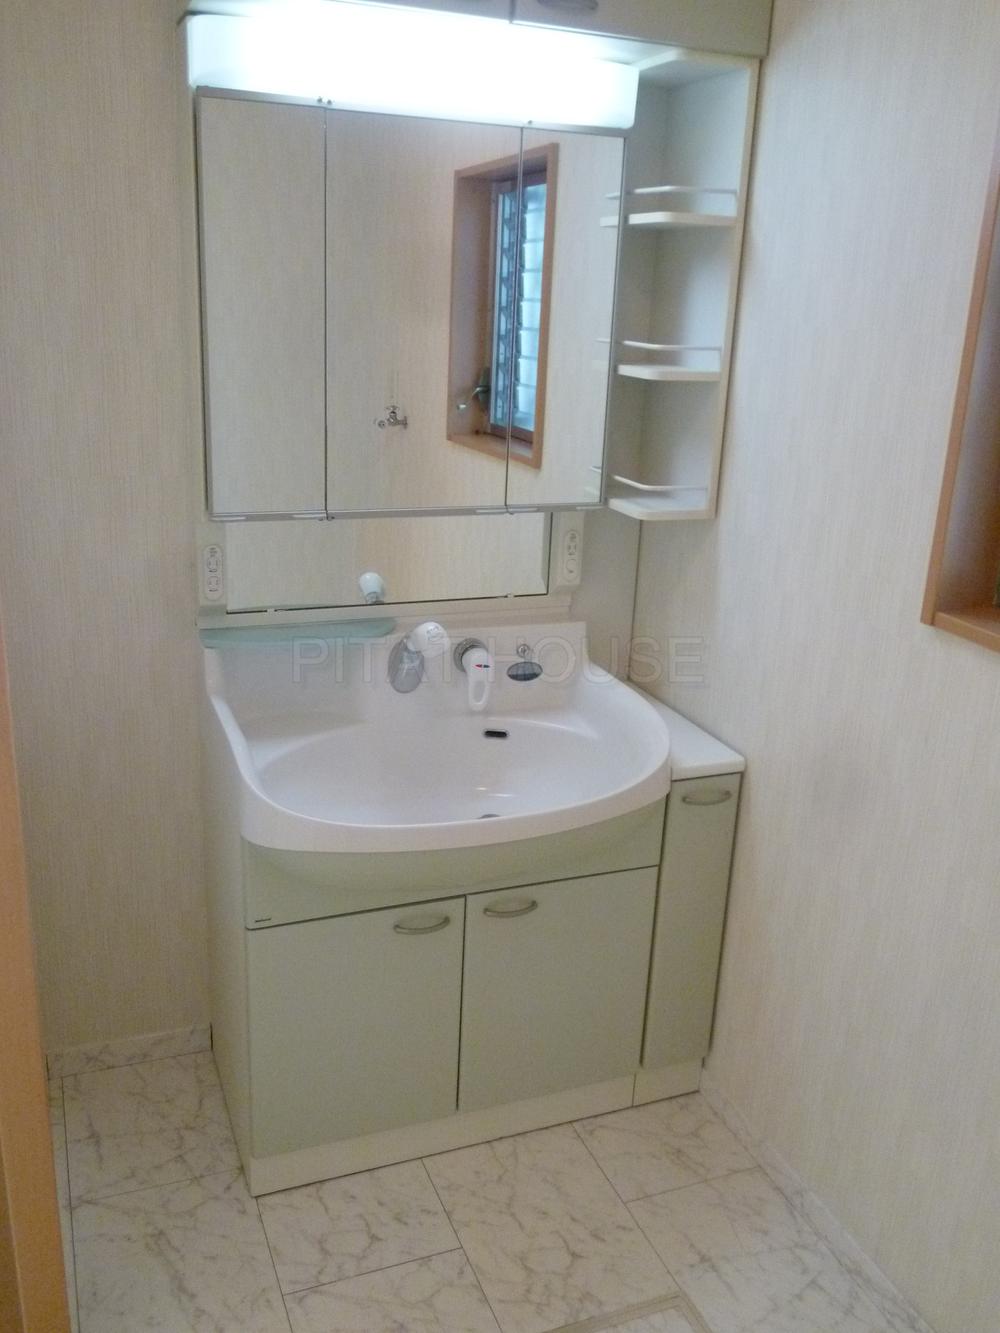 Wash basin, toilet.  ◆ Basin is a vanity with a large triple mirror.